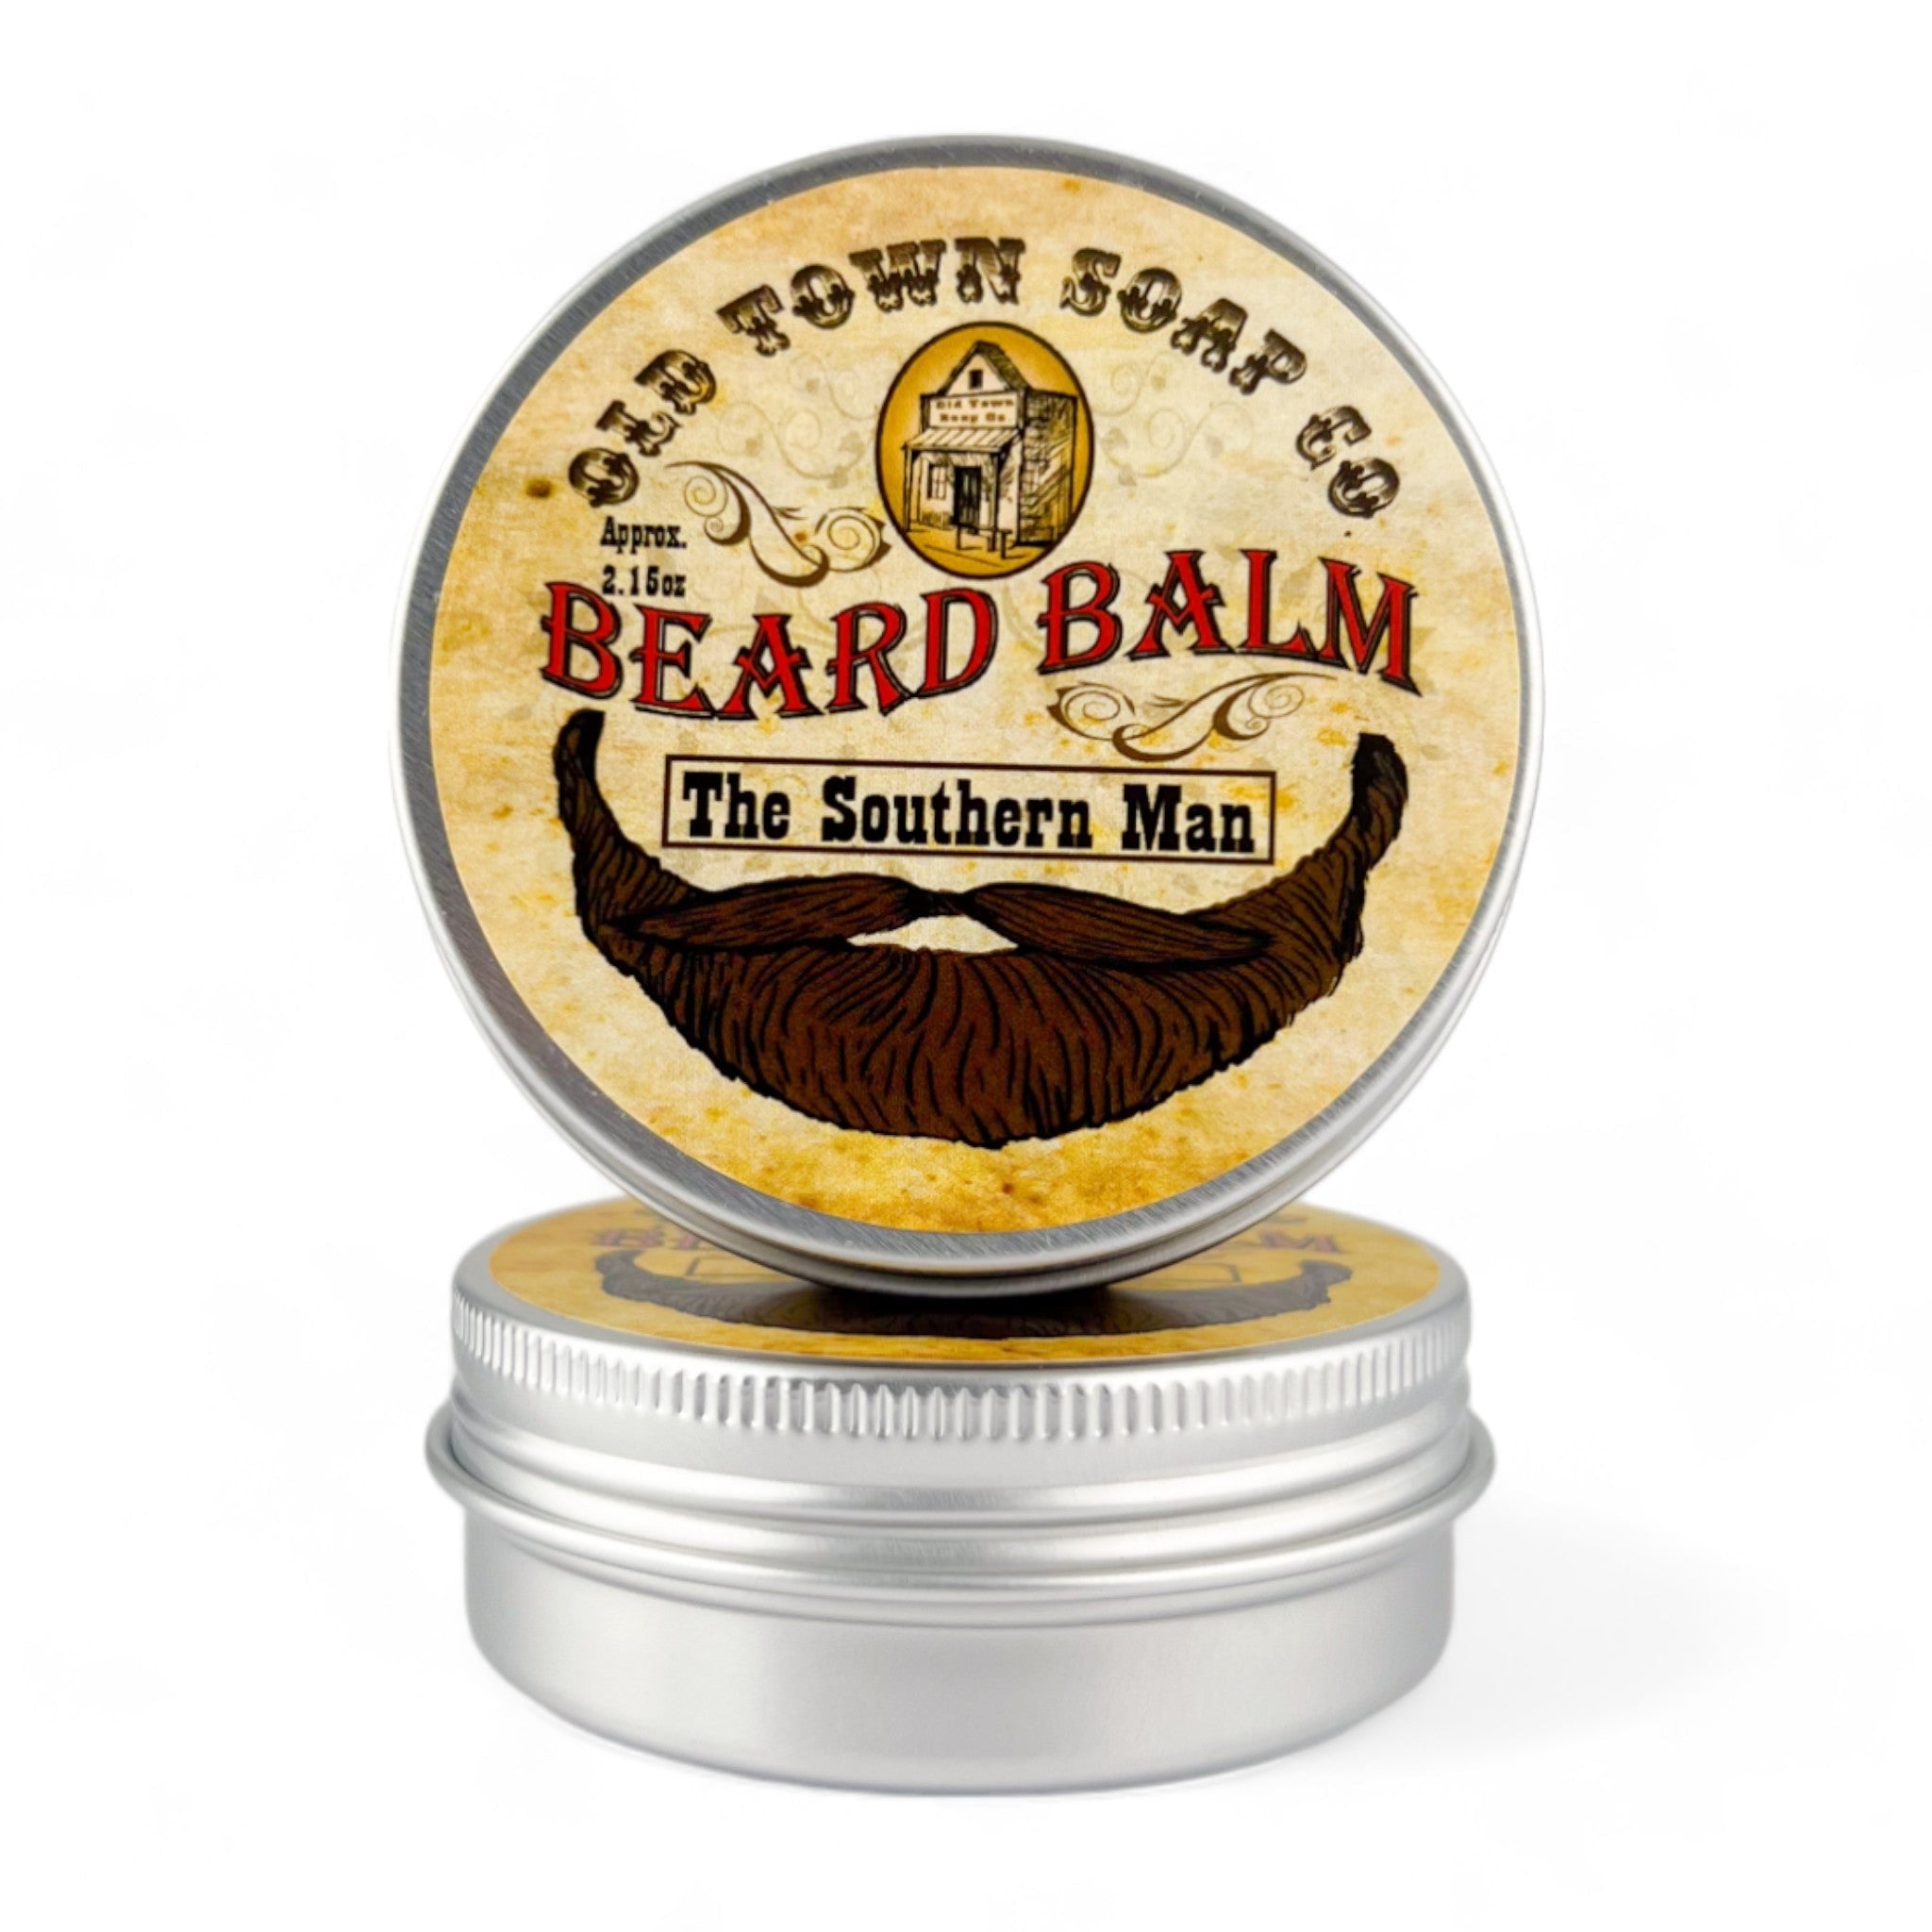 The Southern Man Beard Balm - Old Town Soap Co.